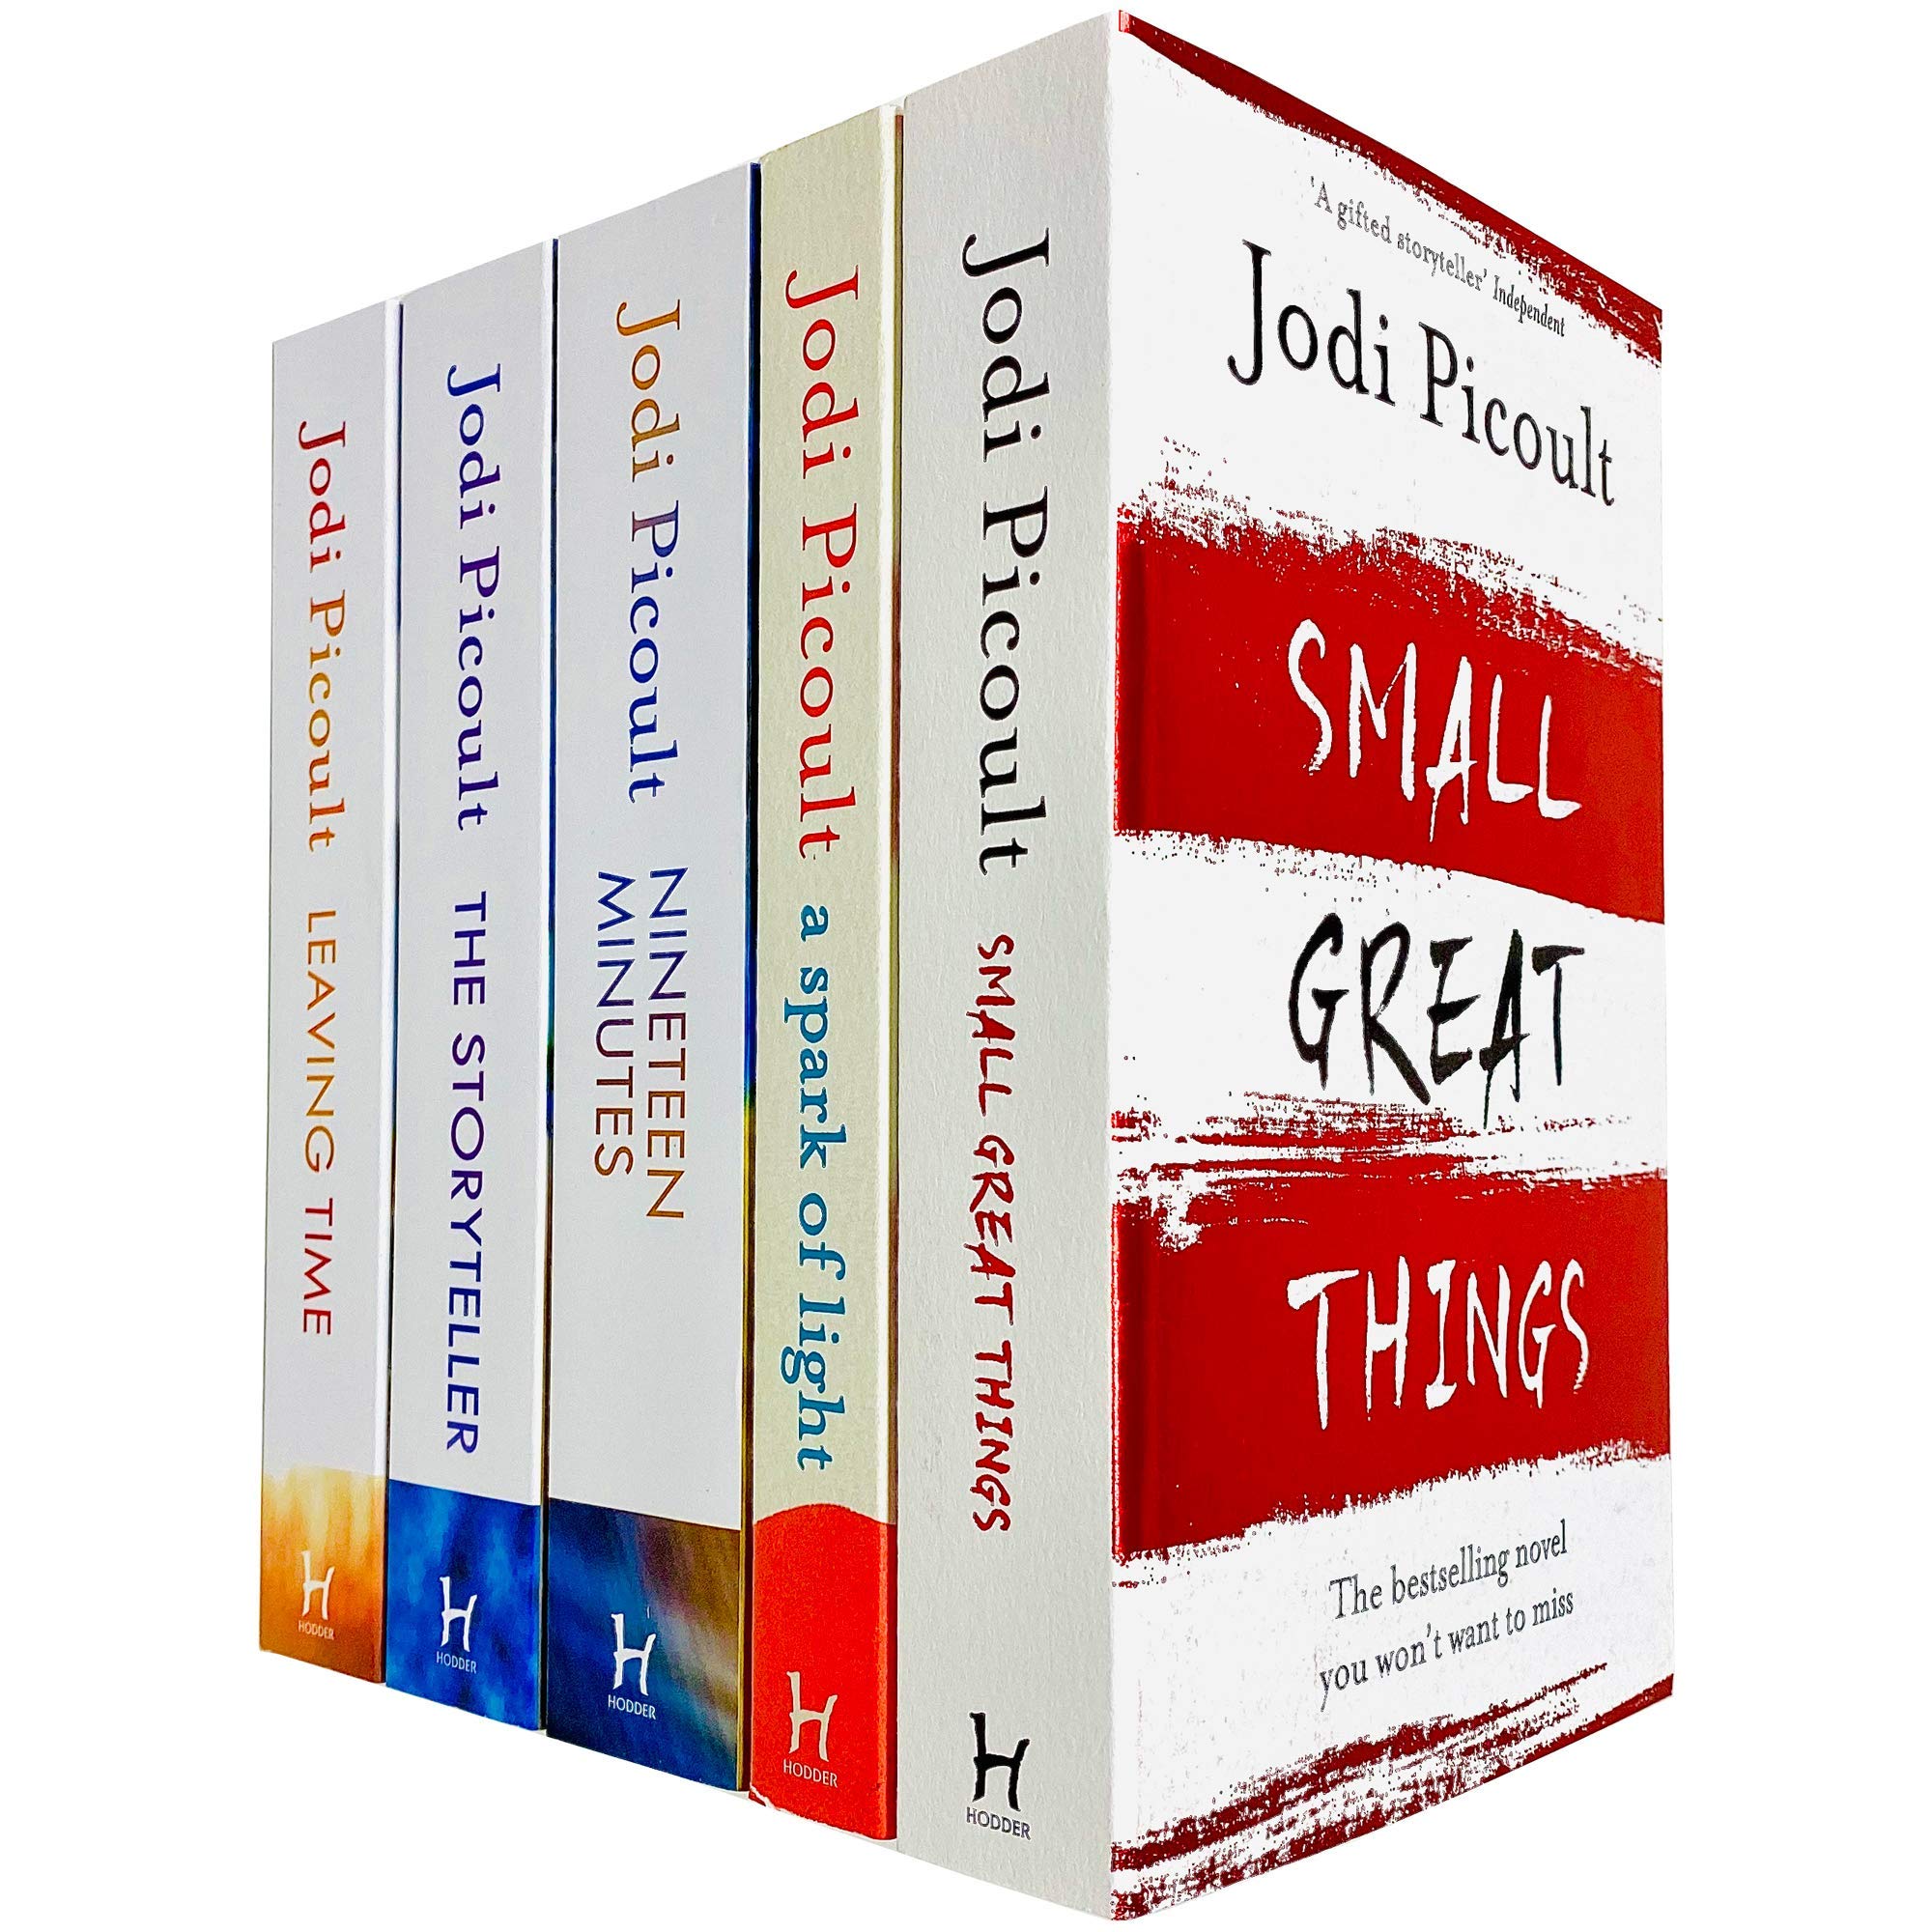 Jodi Picoult Novels 5 Books Collection Set (Small Great Things, A Spark of Light) - Lets Buy Books